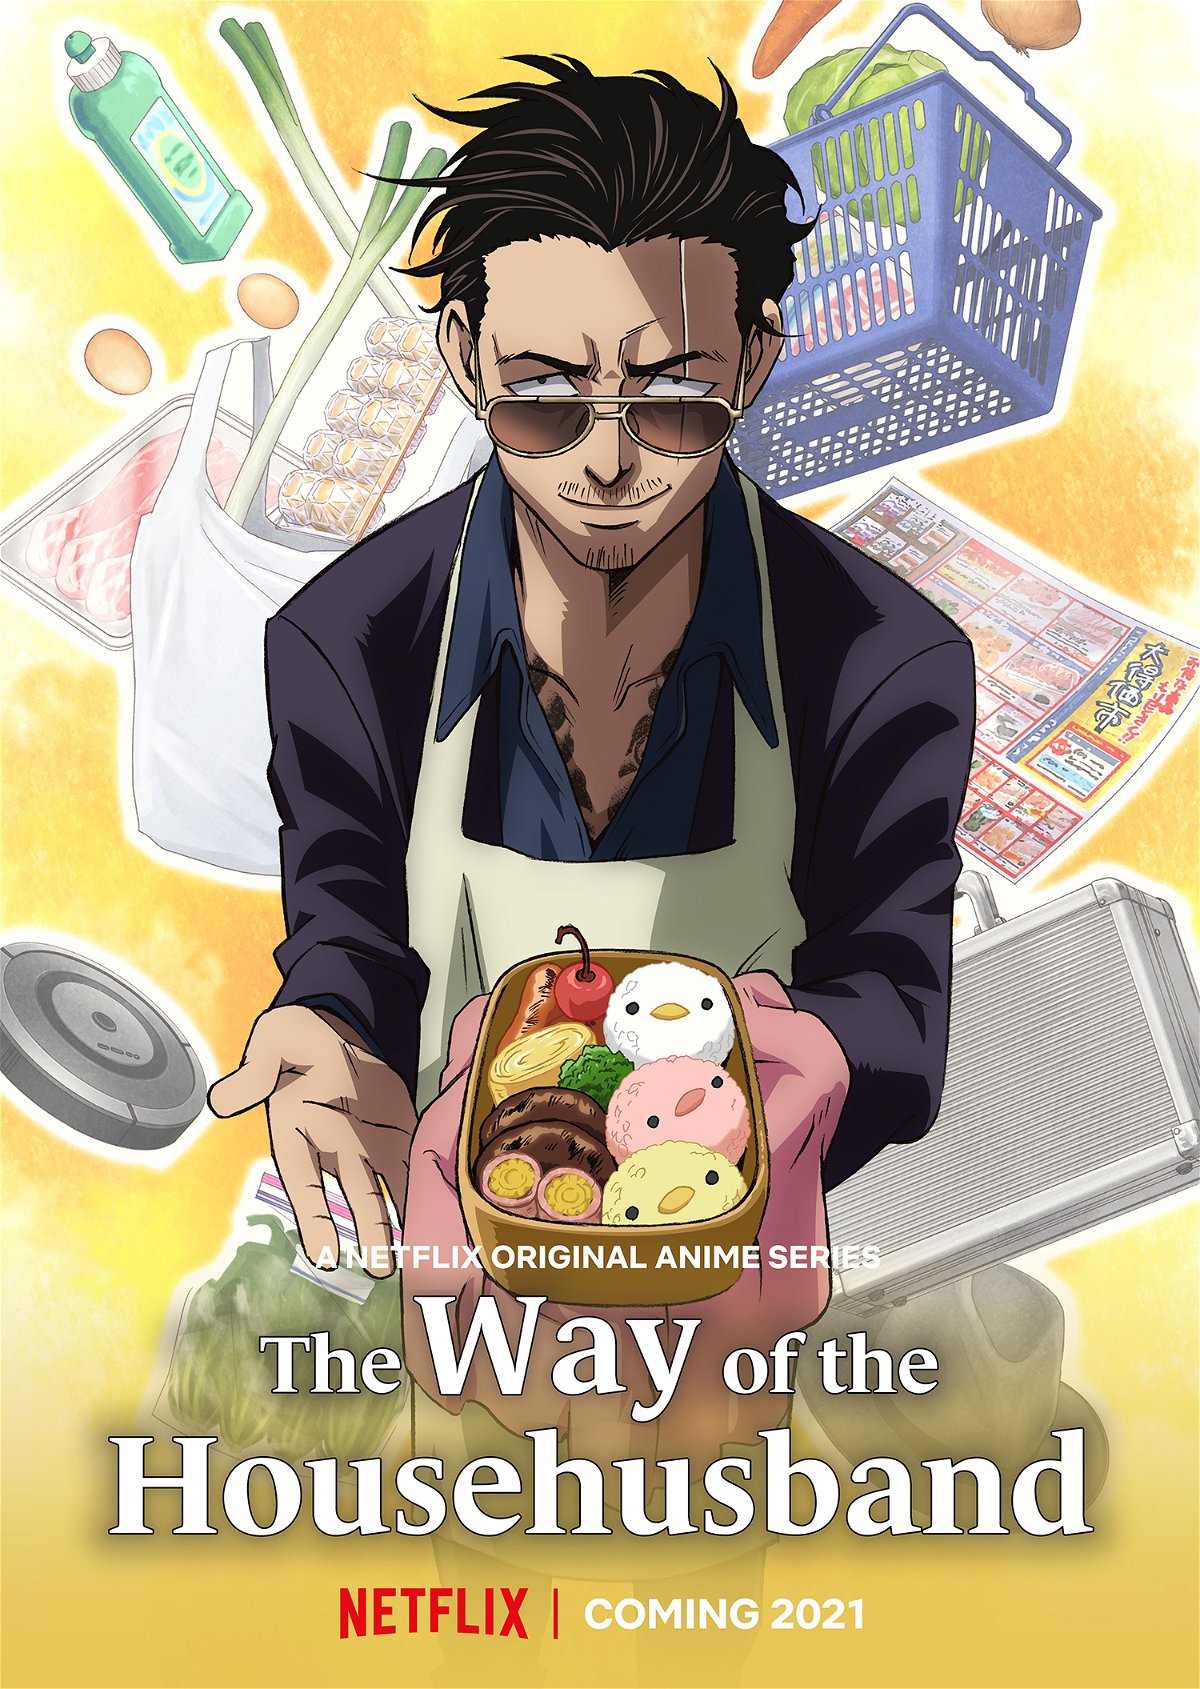 The way of the househusband anime